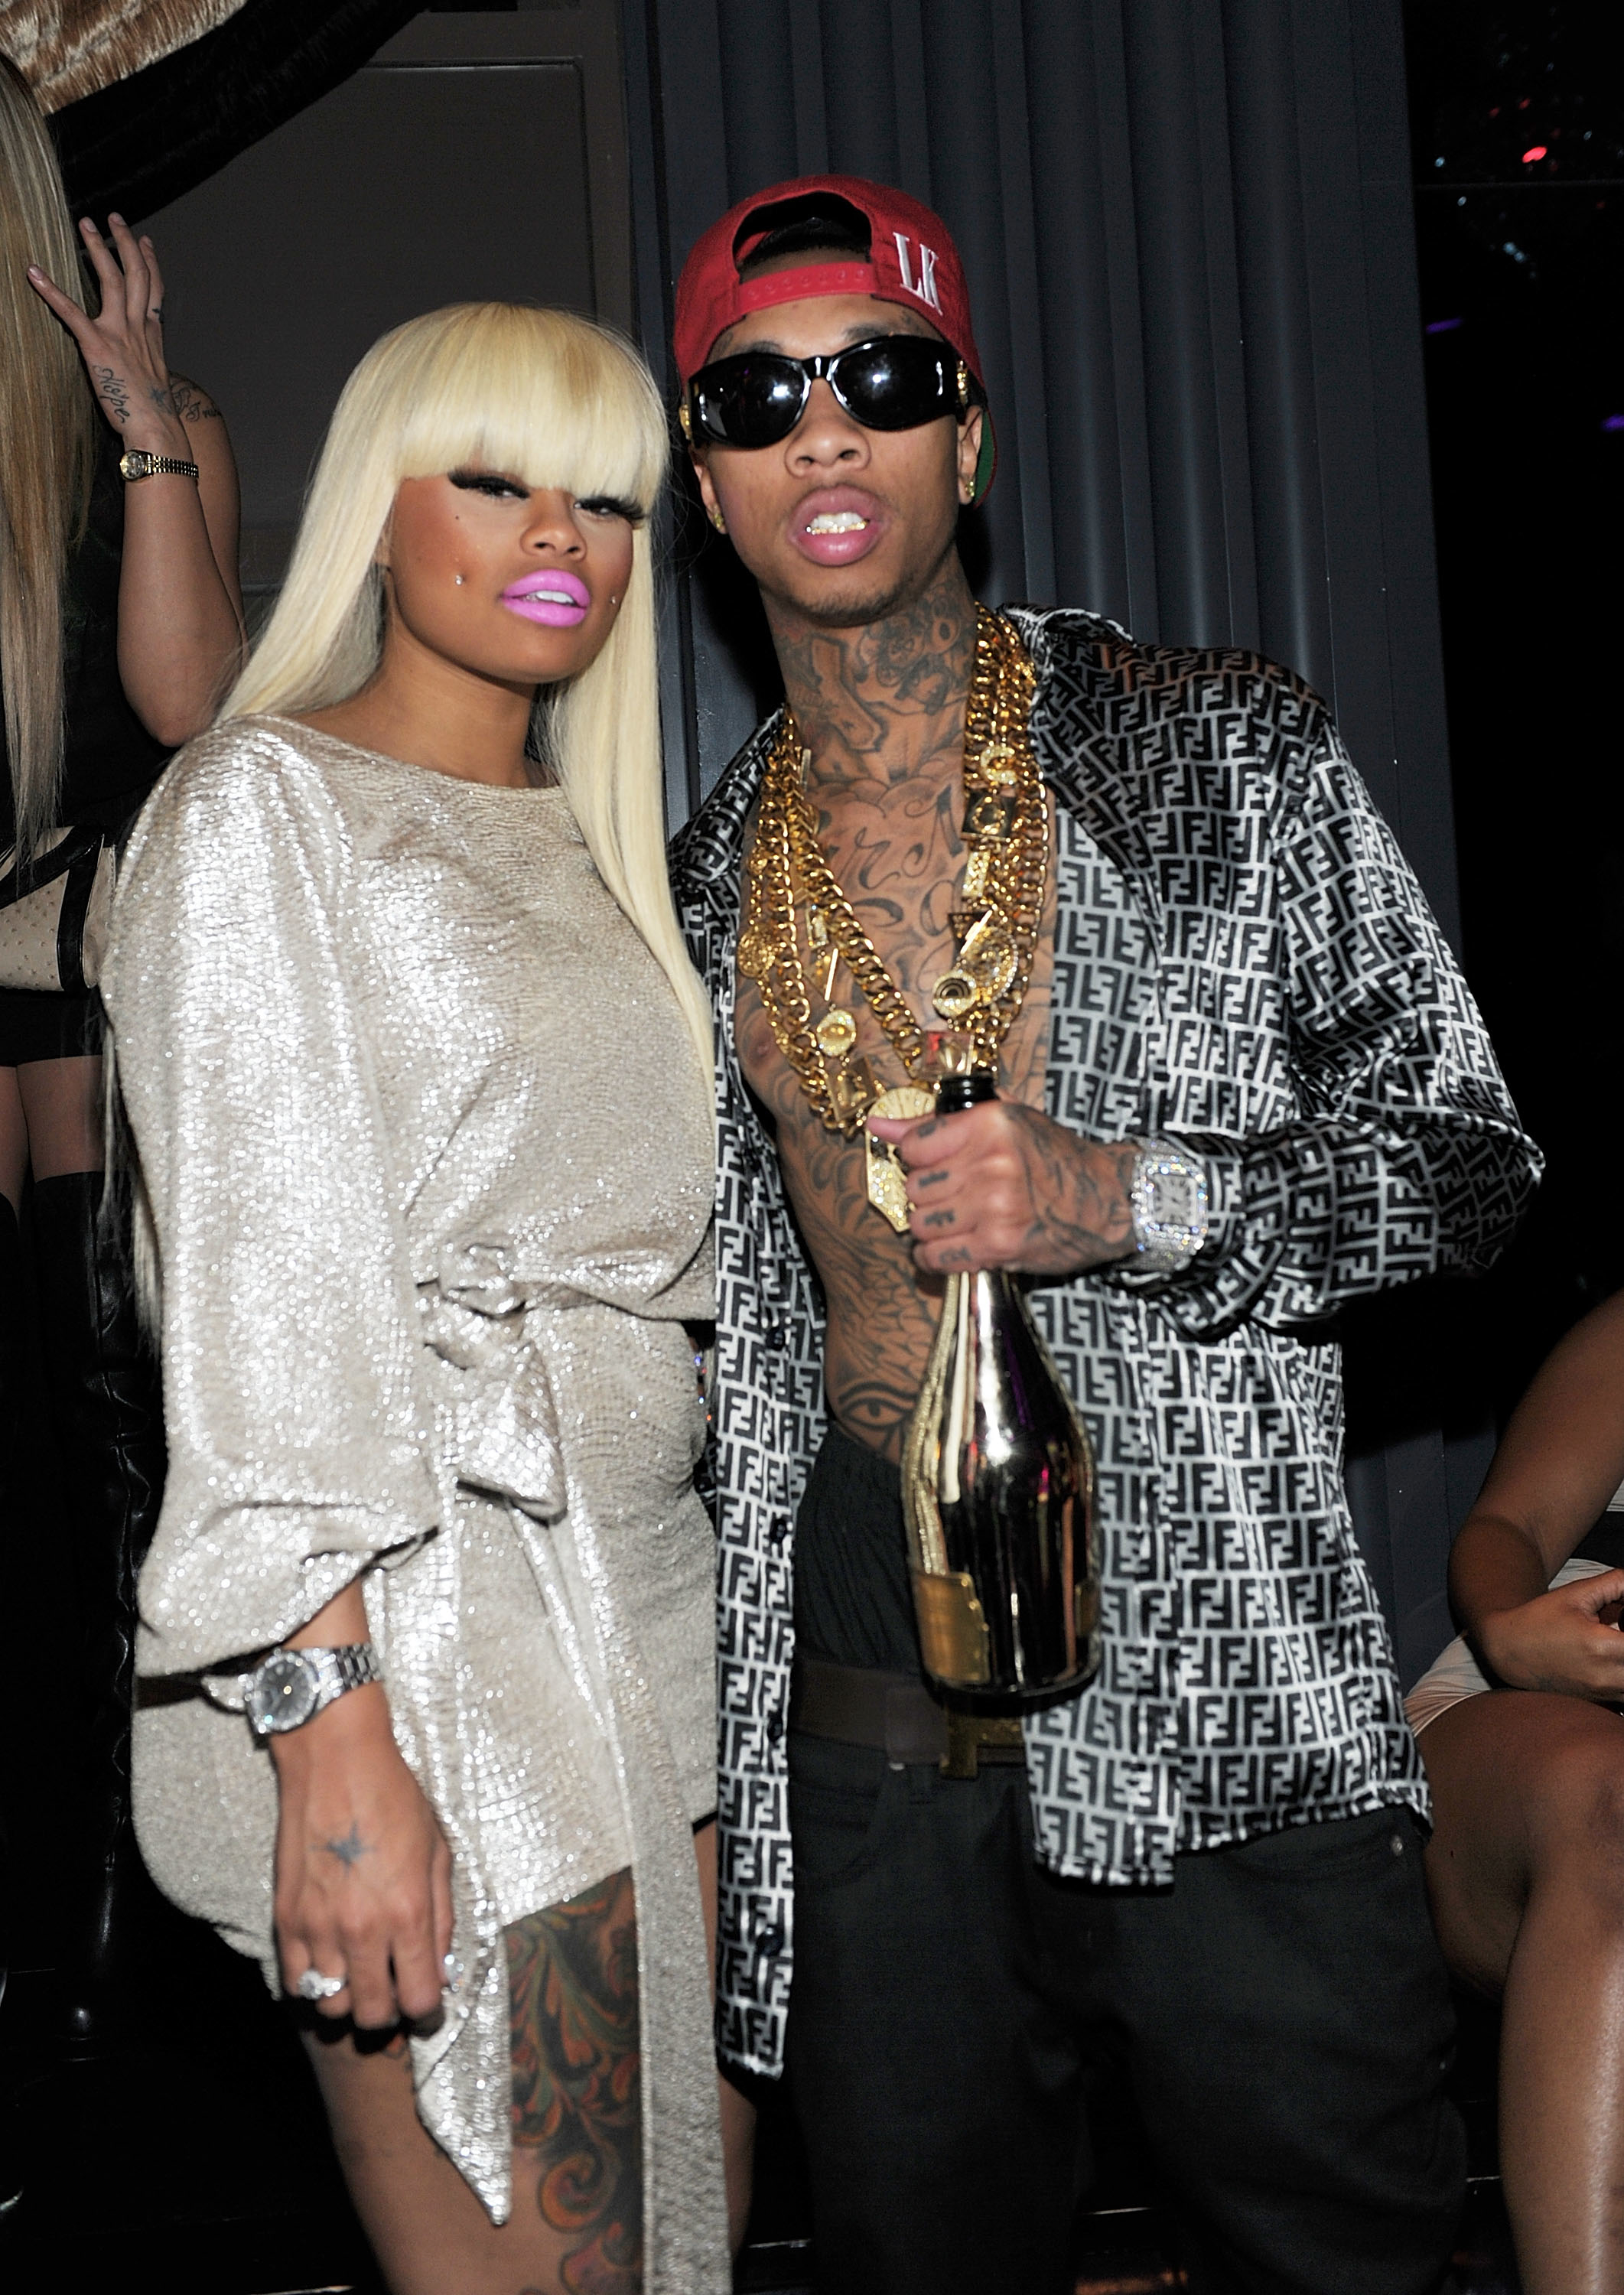 Close-up of Tyga, holding a champagne bottle, and Angela